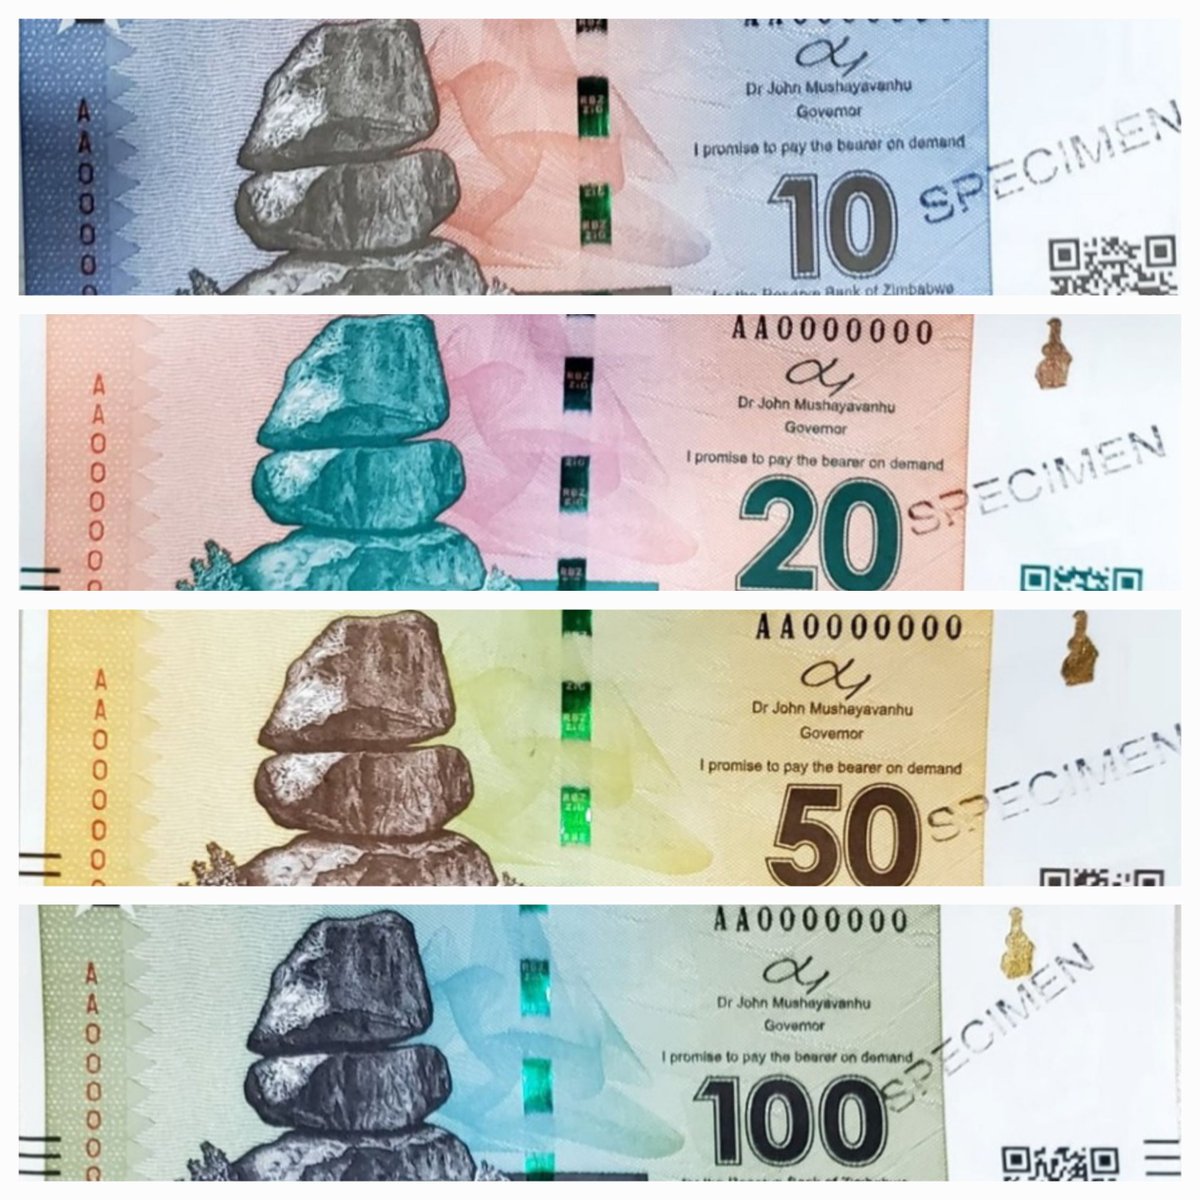 ZIMBABWE'S MUCH ANTICIPATED NEW GOLD-BACKED 'STRUCTURED CURRENCY', THE ZiG, LAUNCHED The Reserve Bank of Zimbabwe [RBZ] today launched a new mainly gold-backed structured currency, called the ZiG, which will circulate specimens of which are attached to this post. The ZiG will…